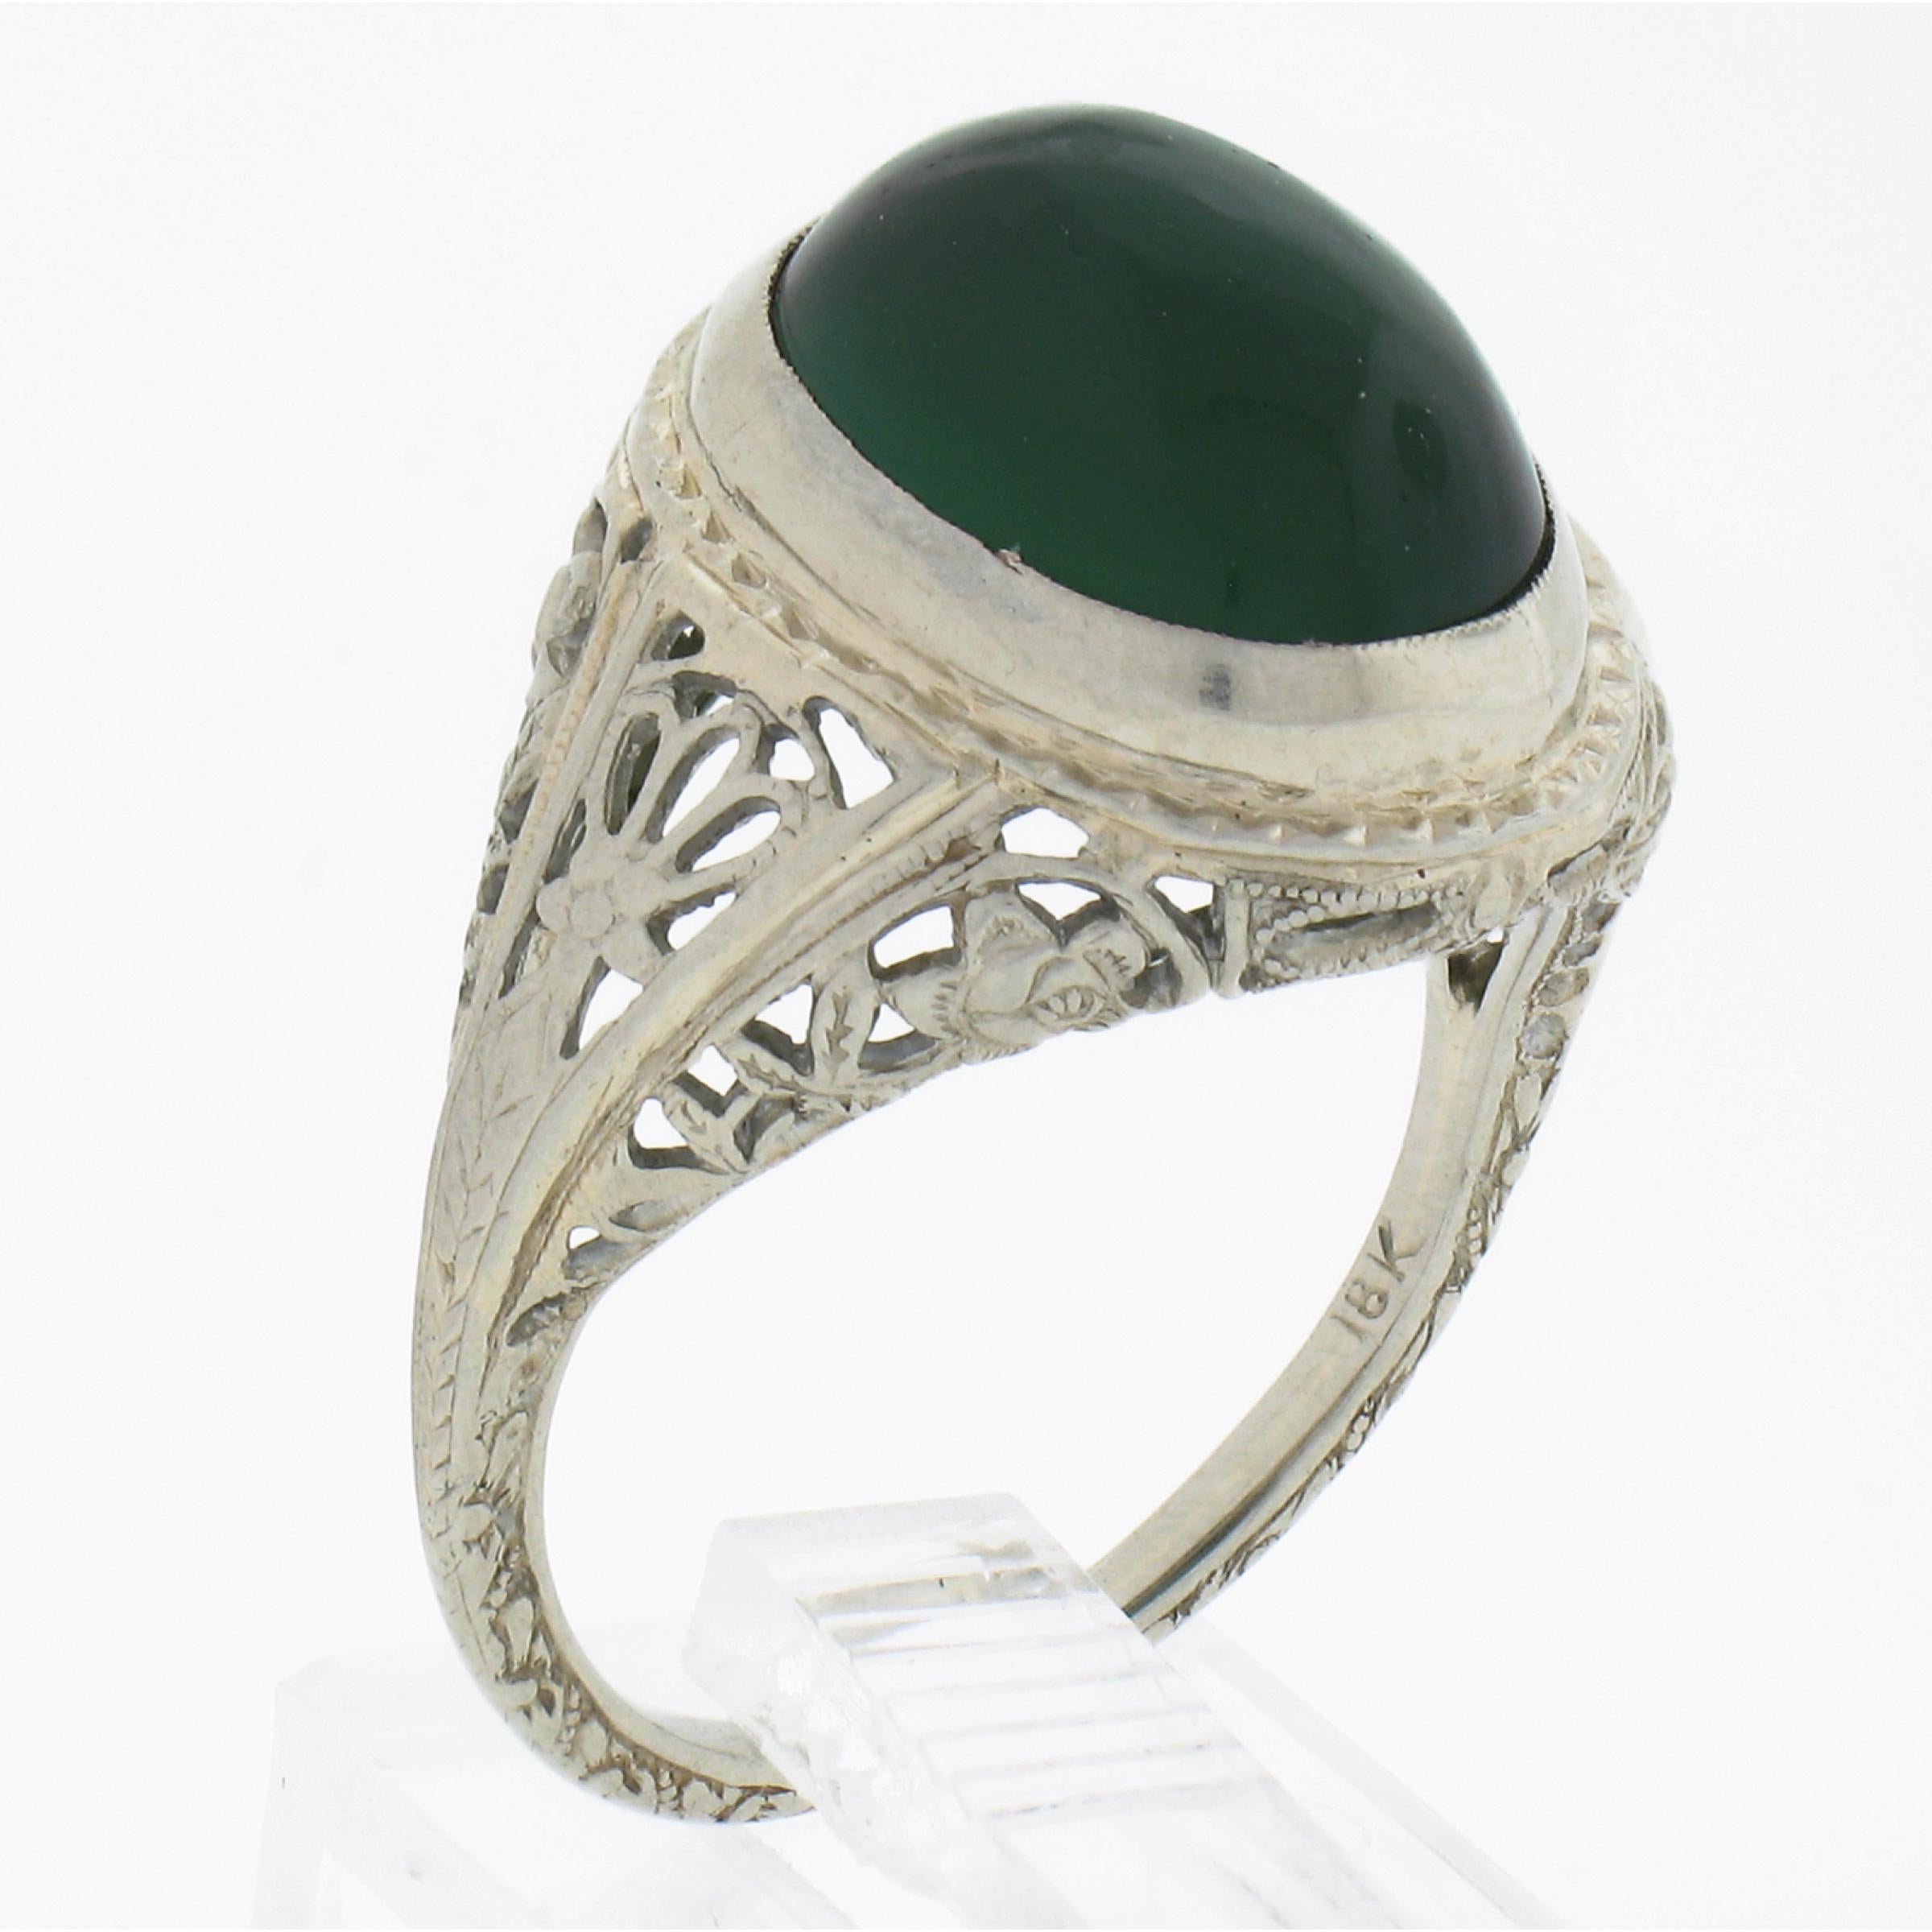 Antique 18K Gold Oval Cabochon Cut Onyx or Chrysoprase Solitaire Filigree Ring For Sale 4